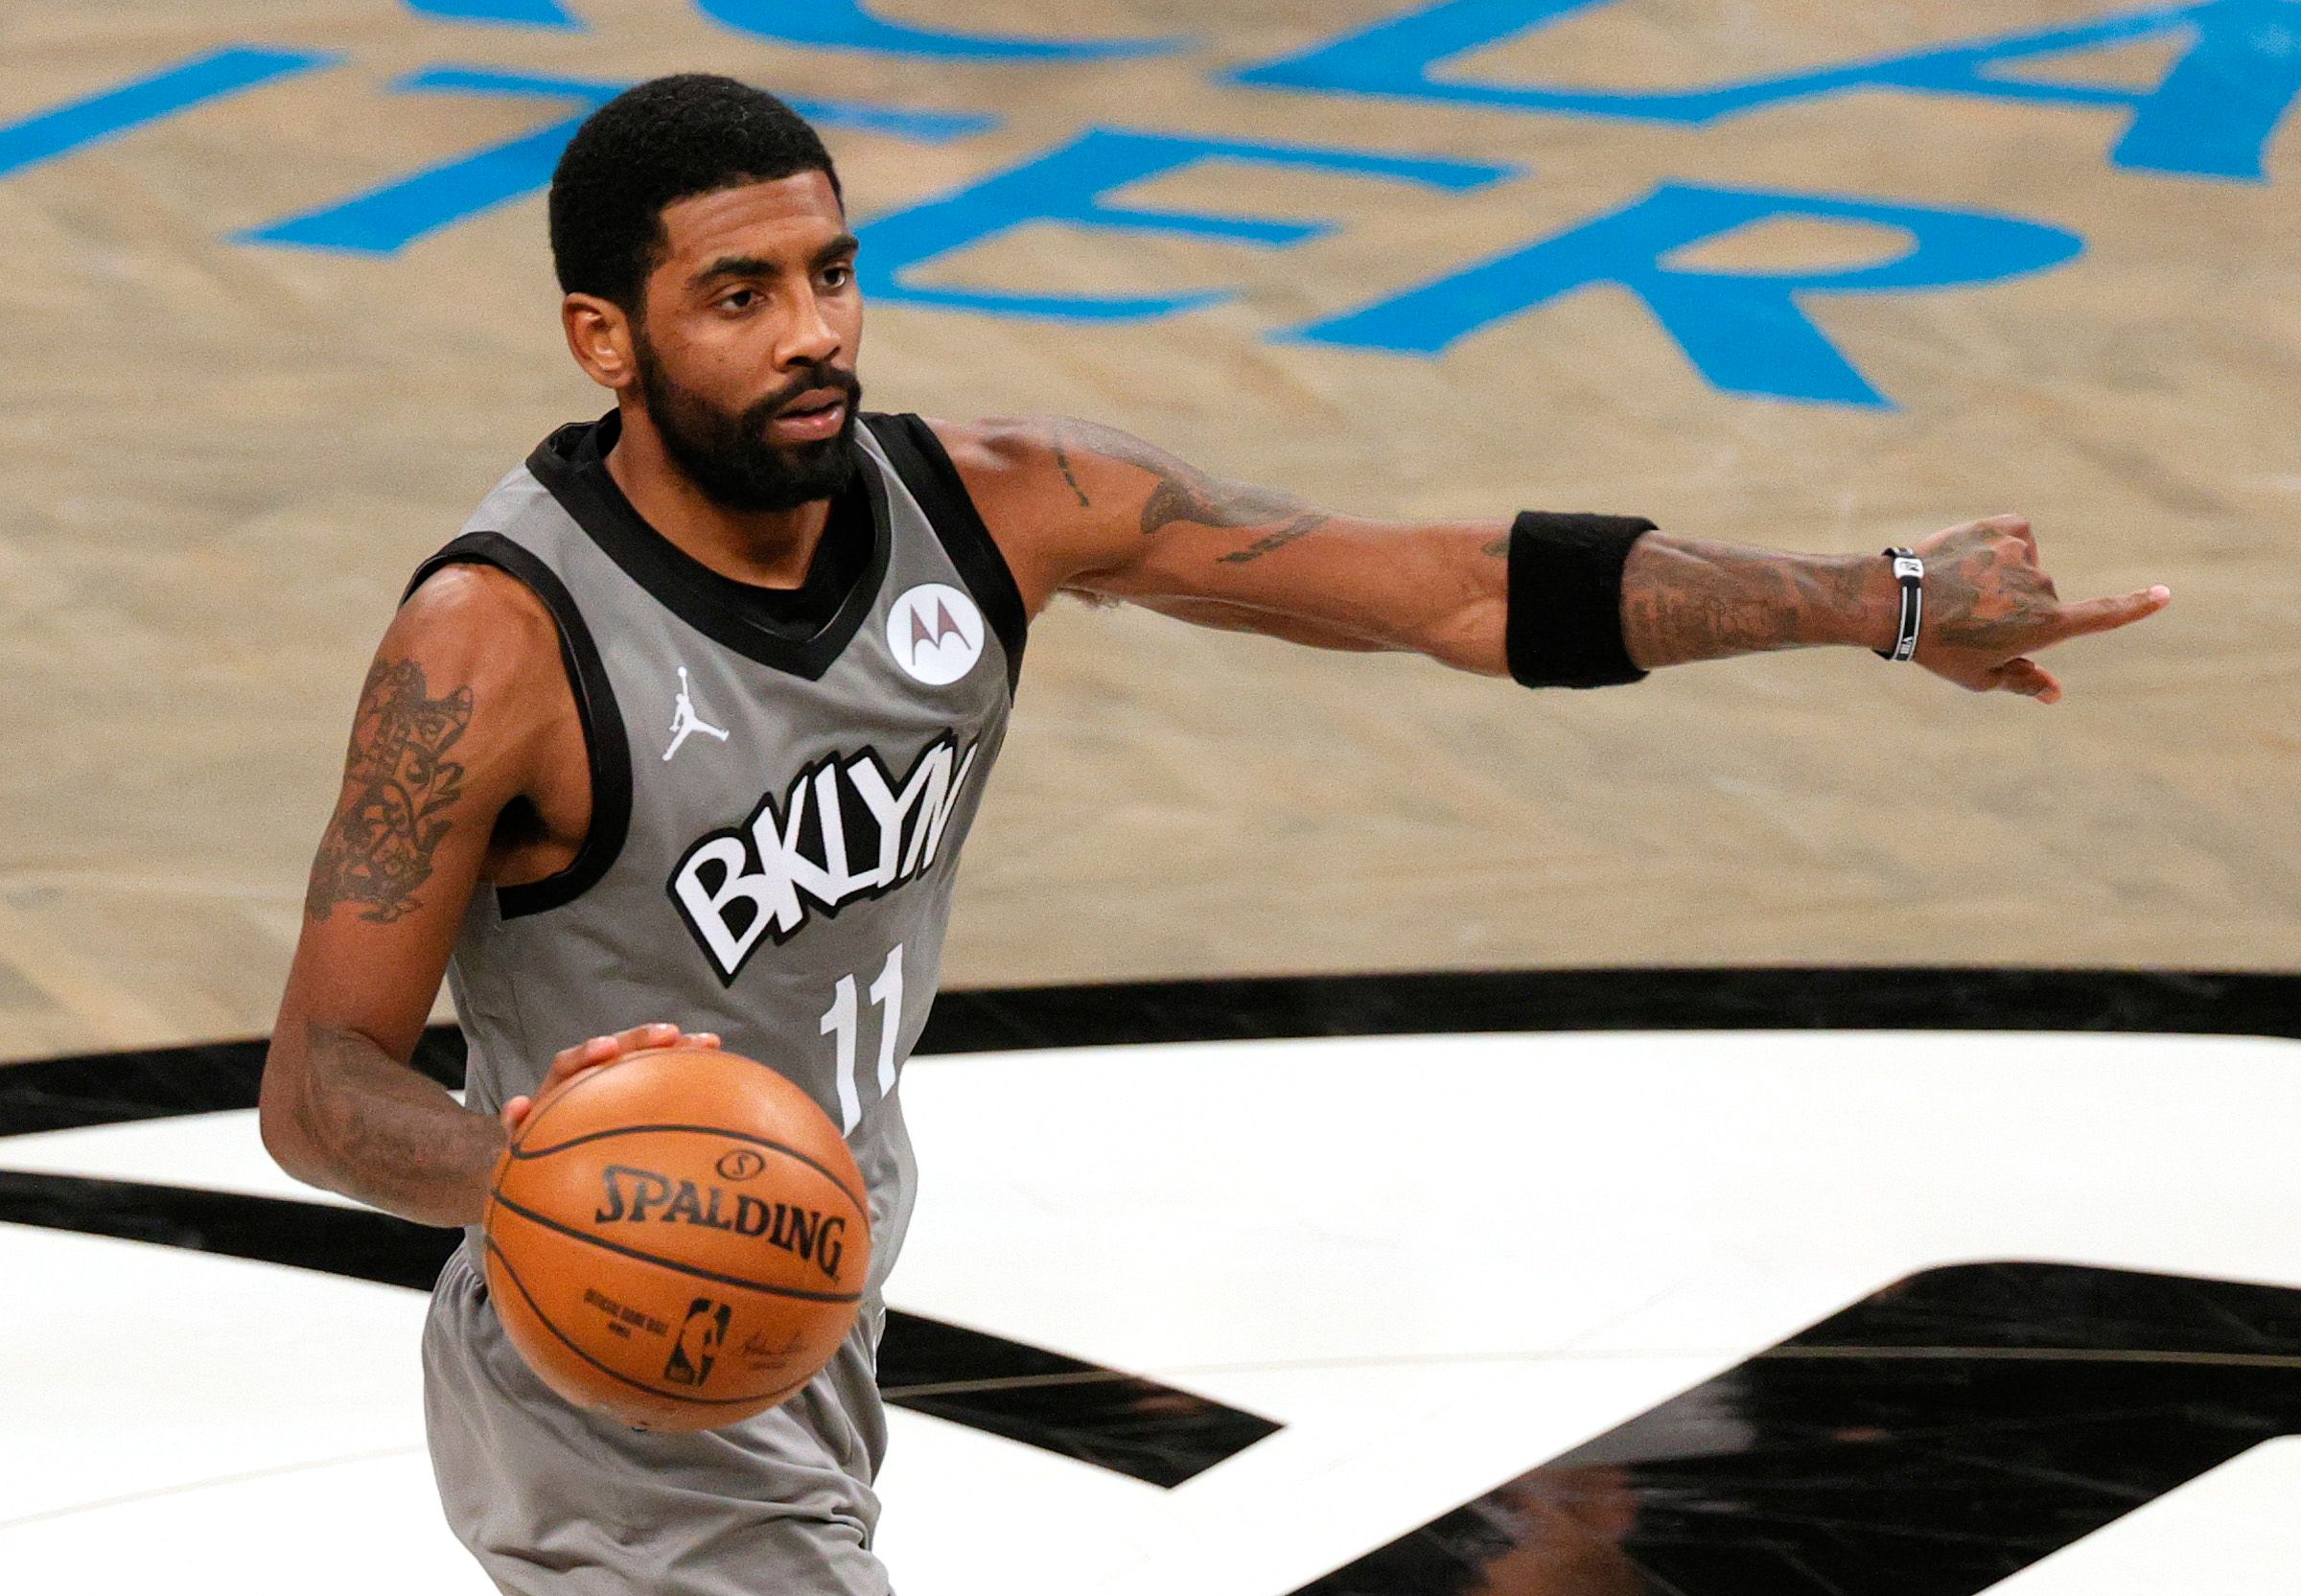 Kyrie Irving making plays for the Nets